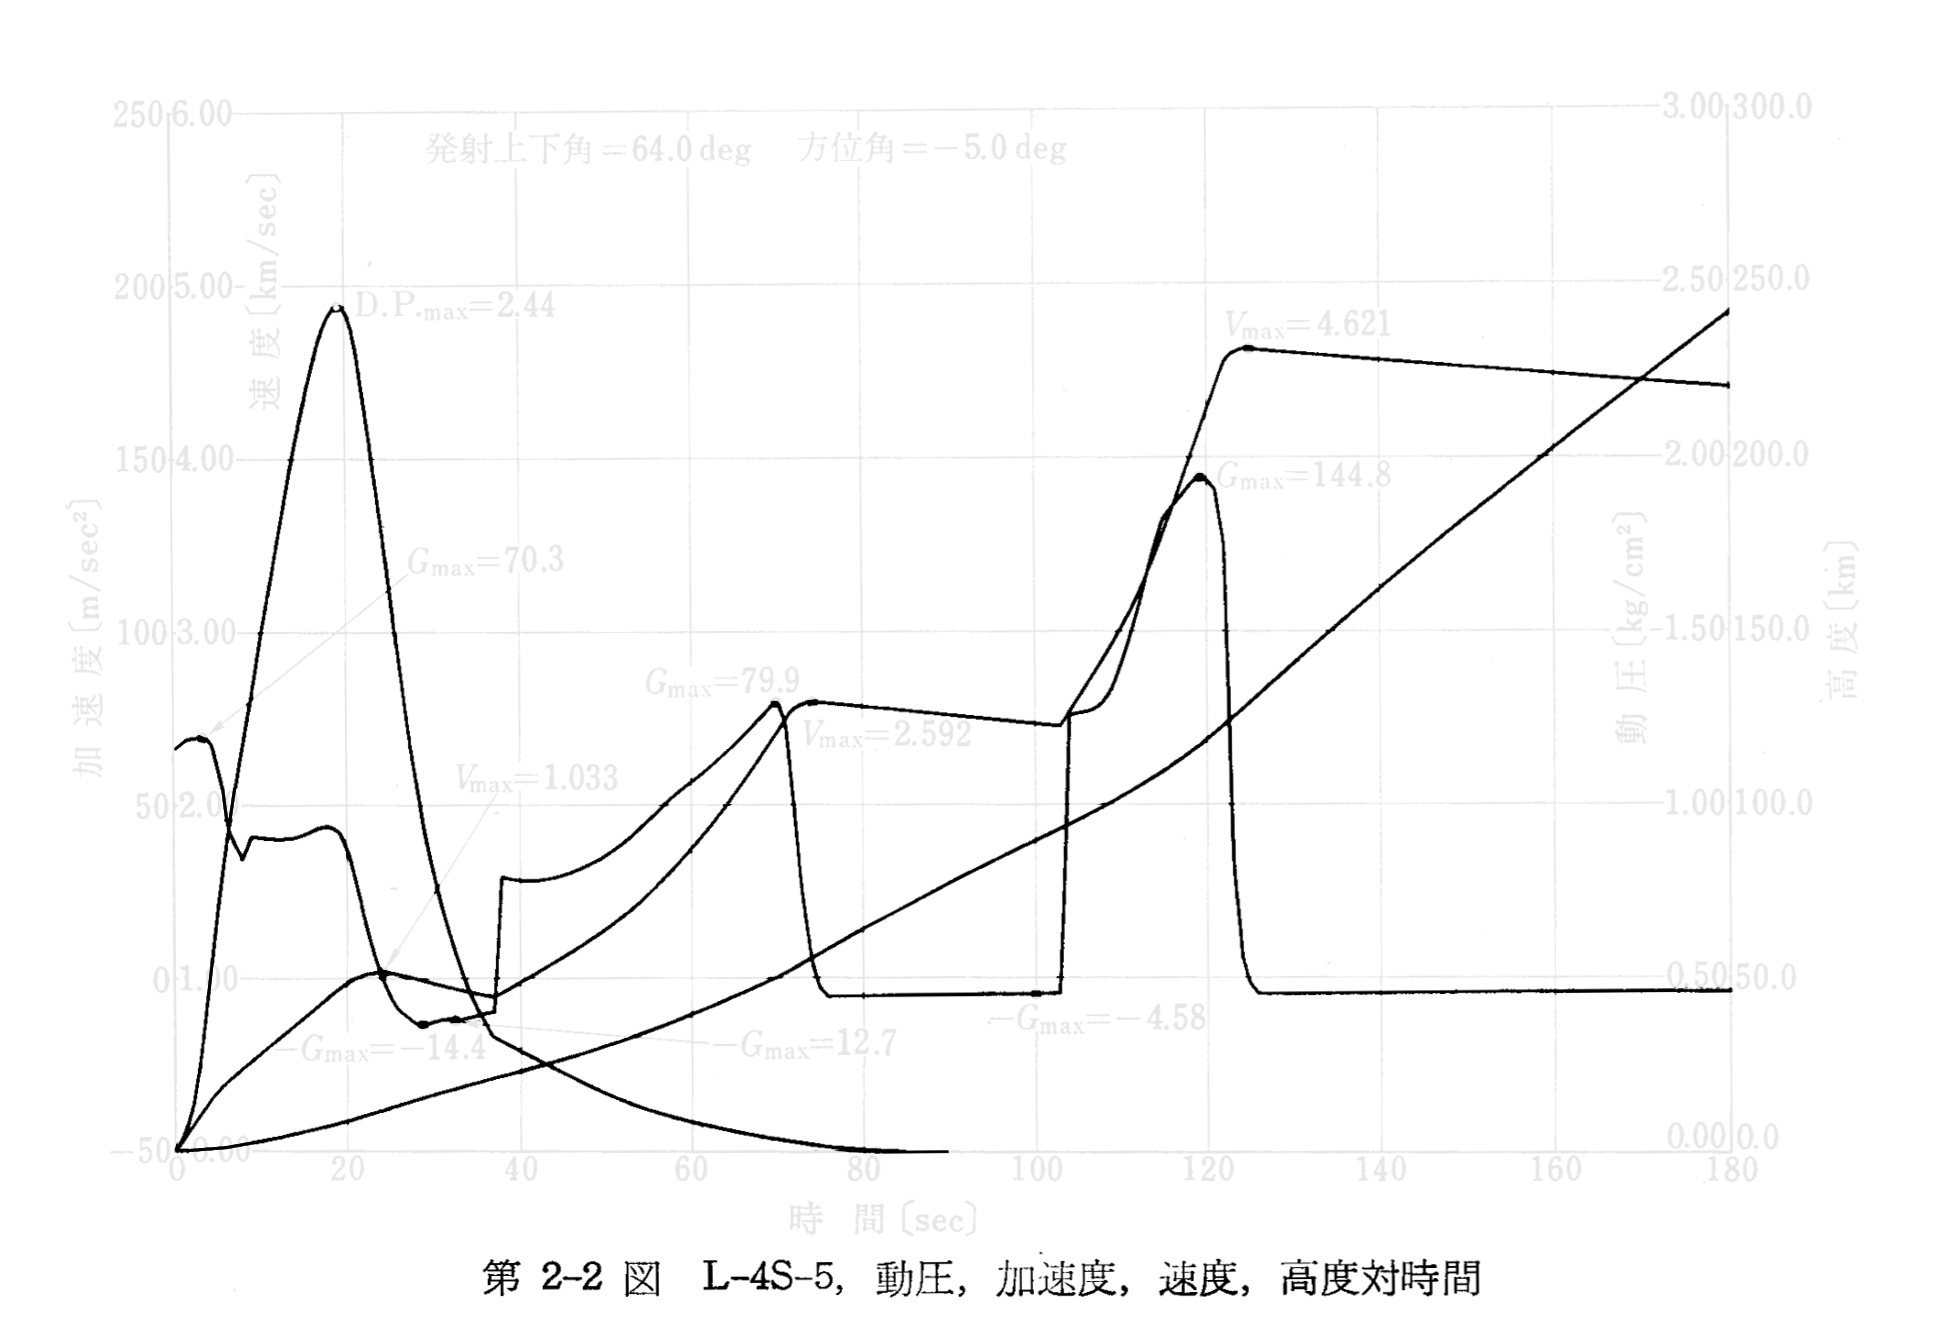 Photocopied chart: Modeled trajectory from L-4S-5, first 3 stages